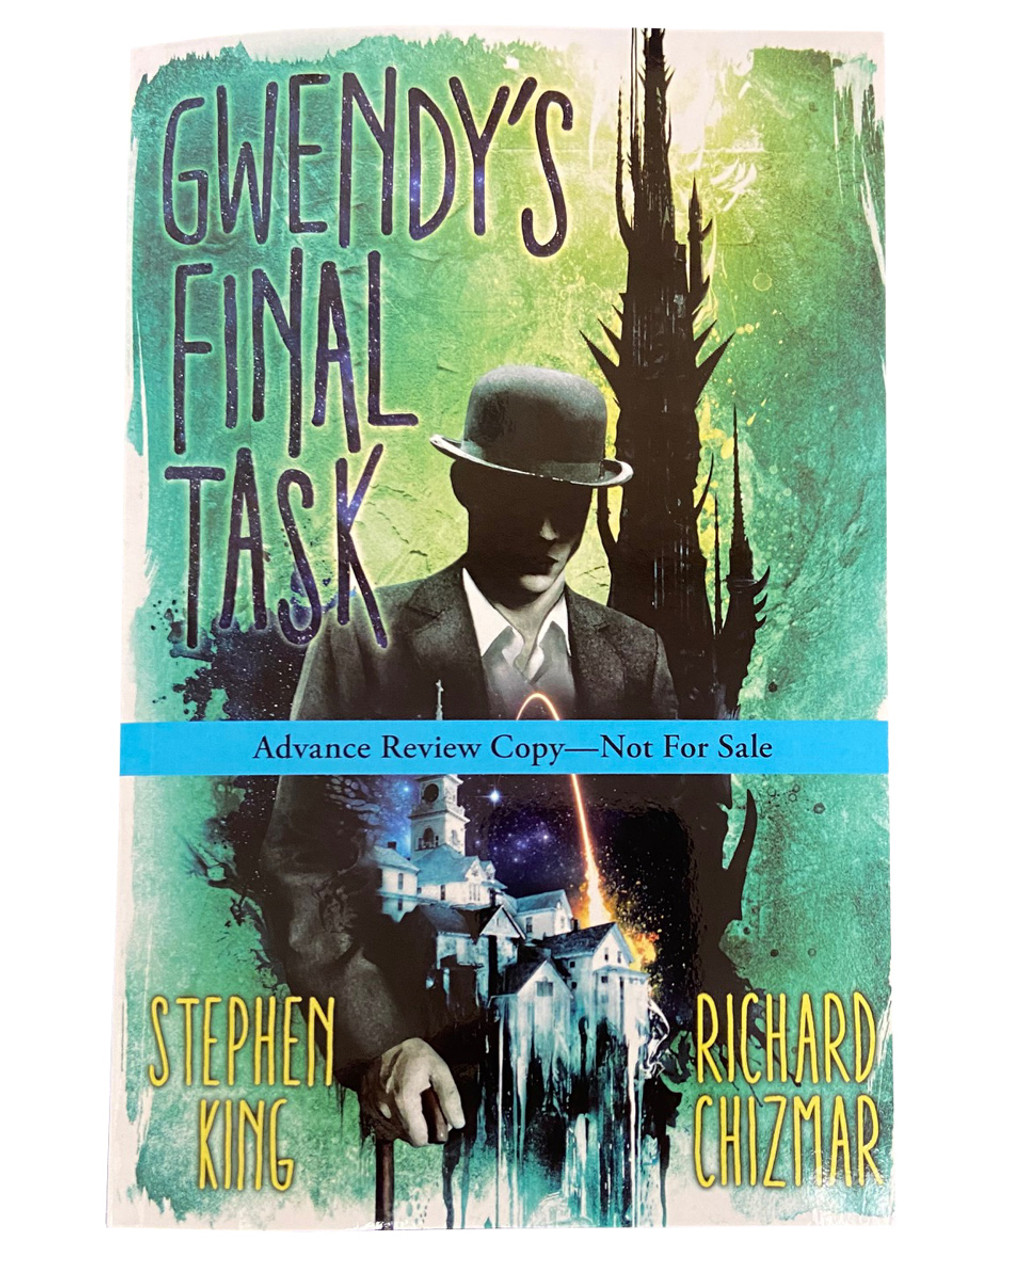 Cemetery Dance Publications - Stephen King, Richard Chizmar "Gwendy's Final Task" ARC Proof, First Edition [Very Fine]